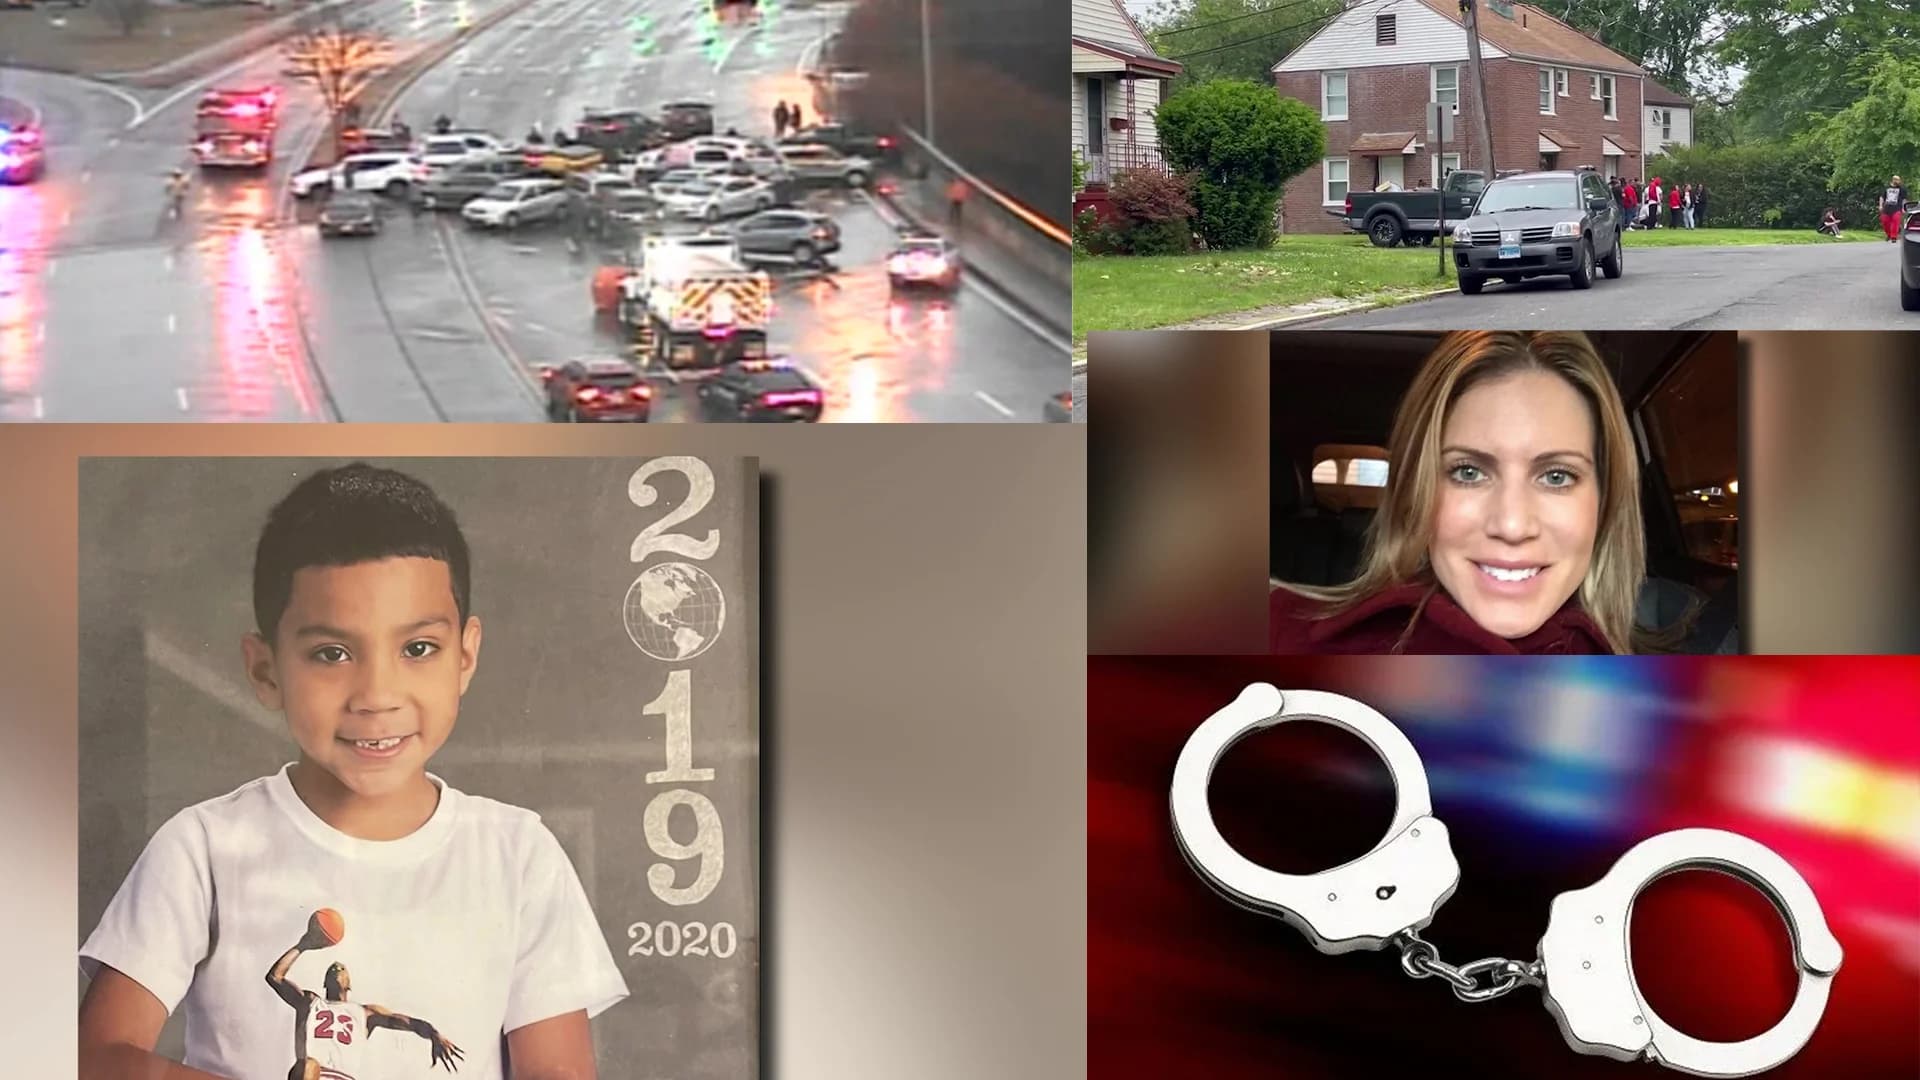 The most-viewed stories on News 12 Connecticut in 2022